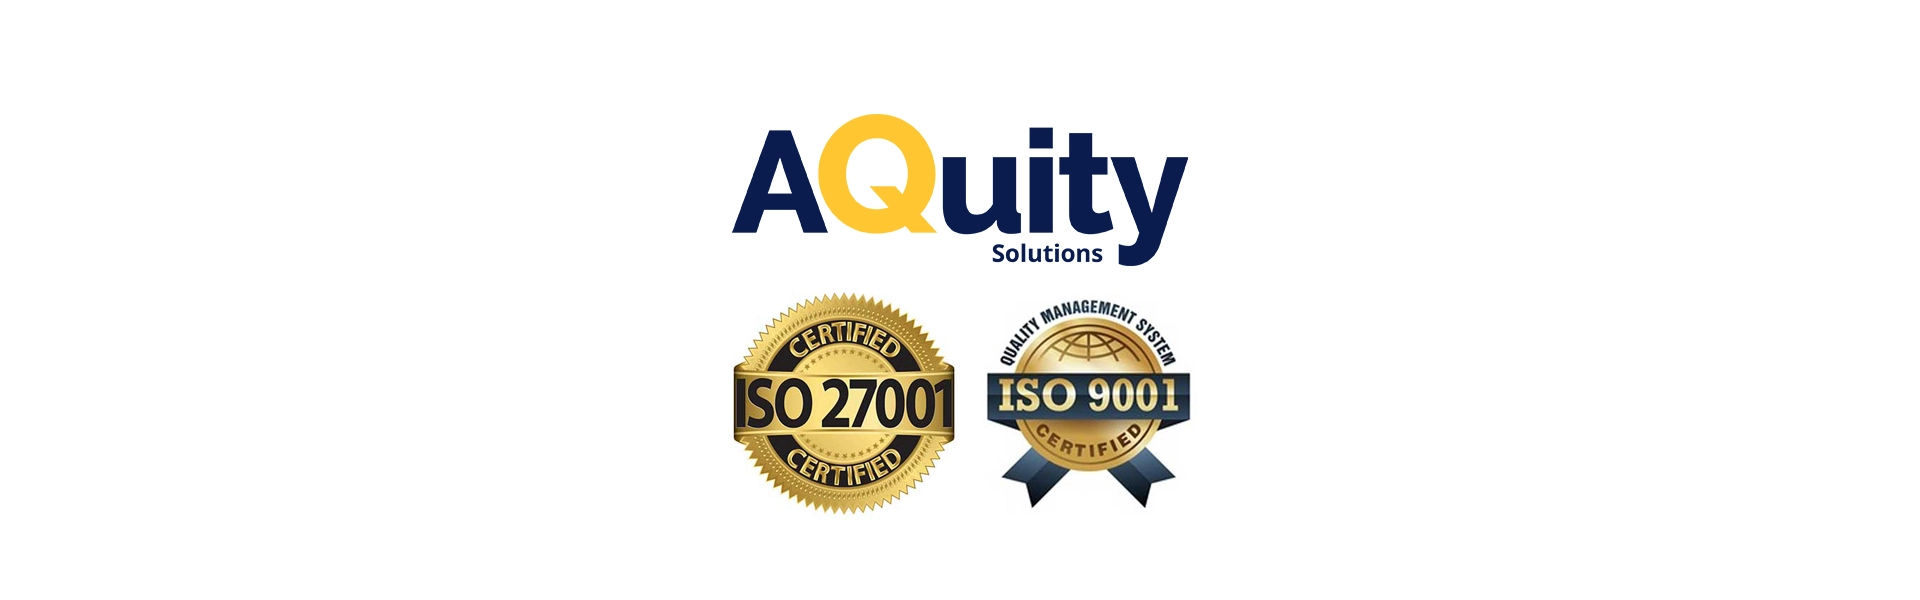 AQuity Solutions with ISO 27001 Certificate